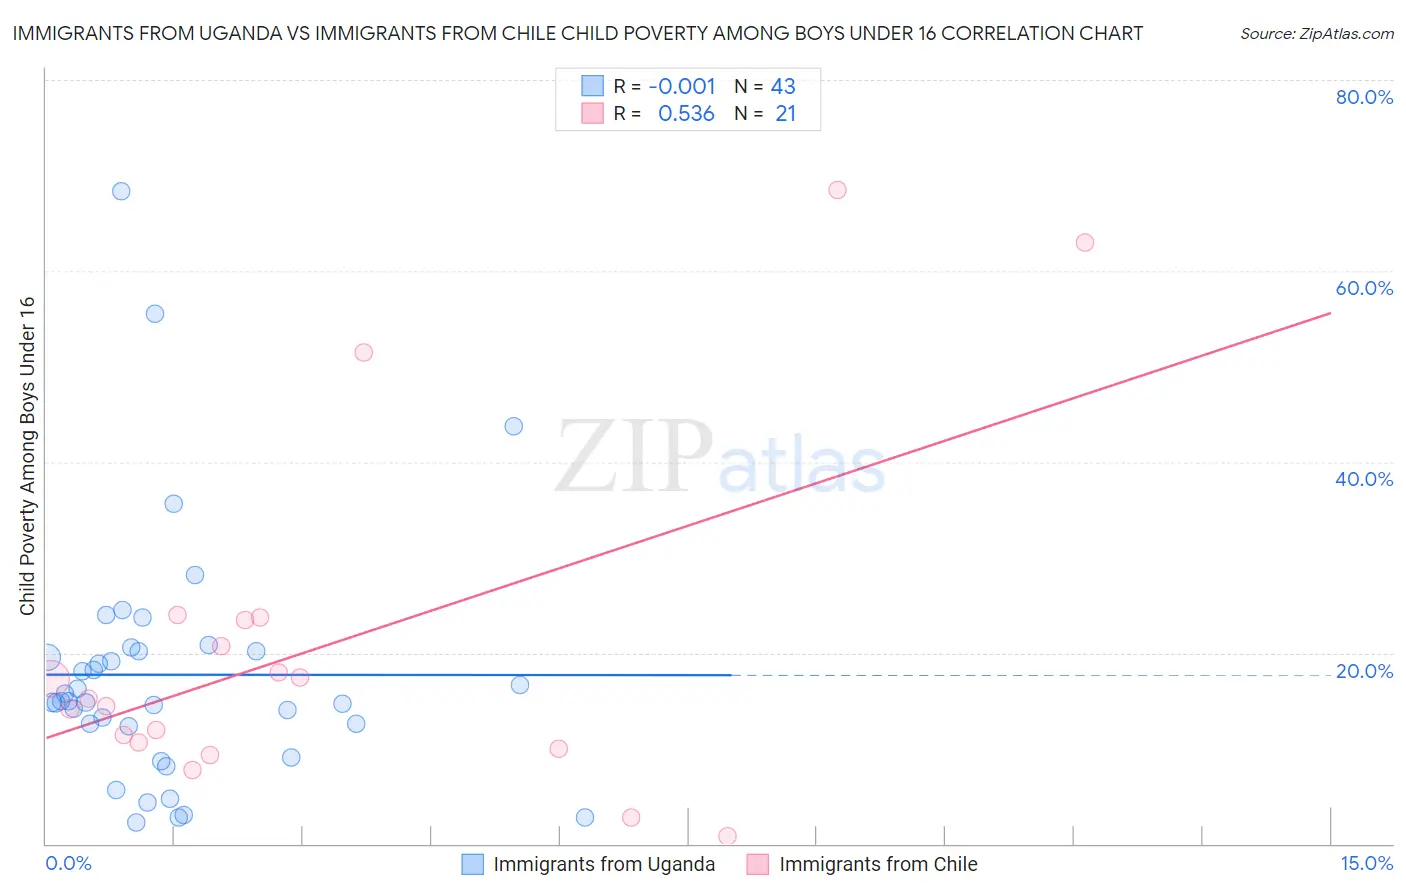 Immigrants from Uganda vs Immigrants from Chile Child Poverty Among Boys Under 16